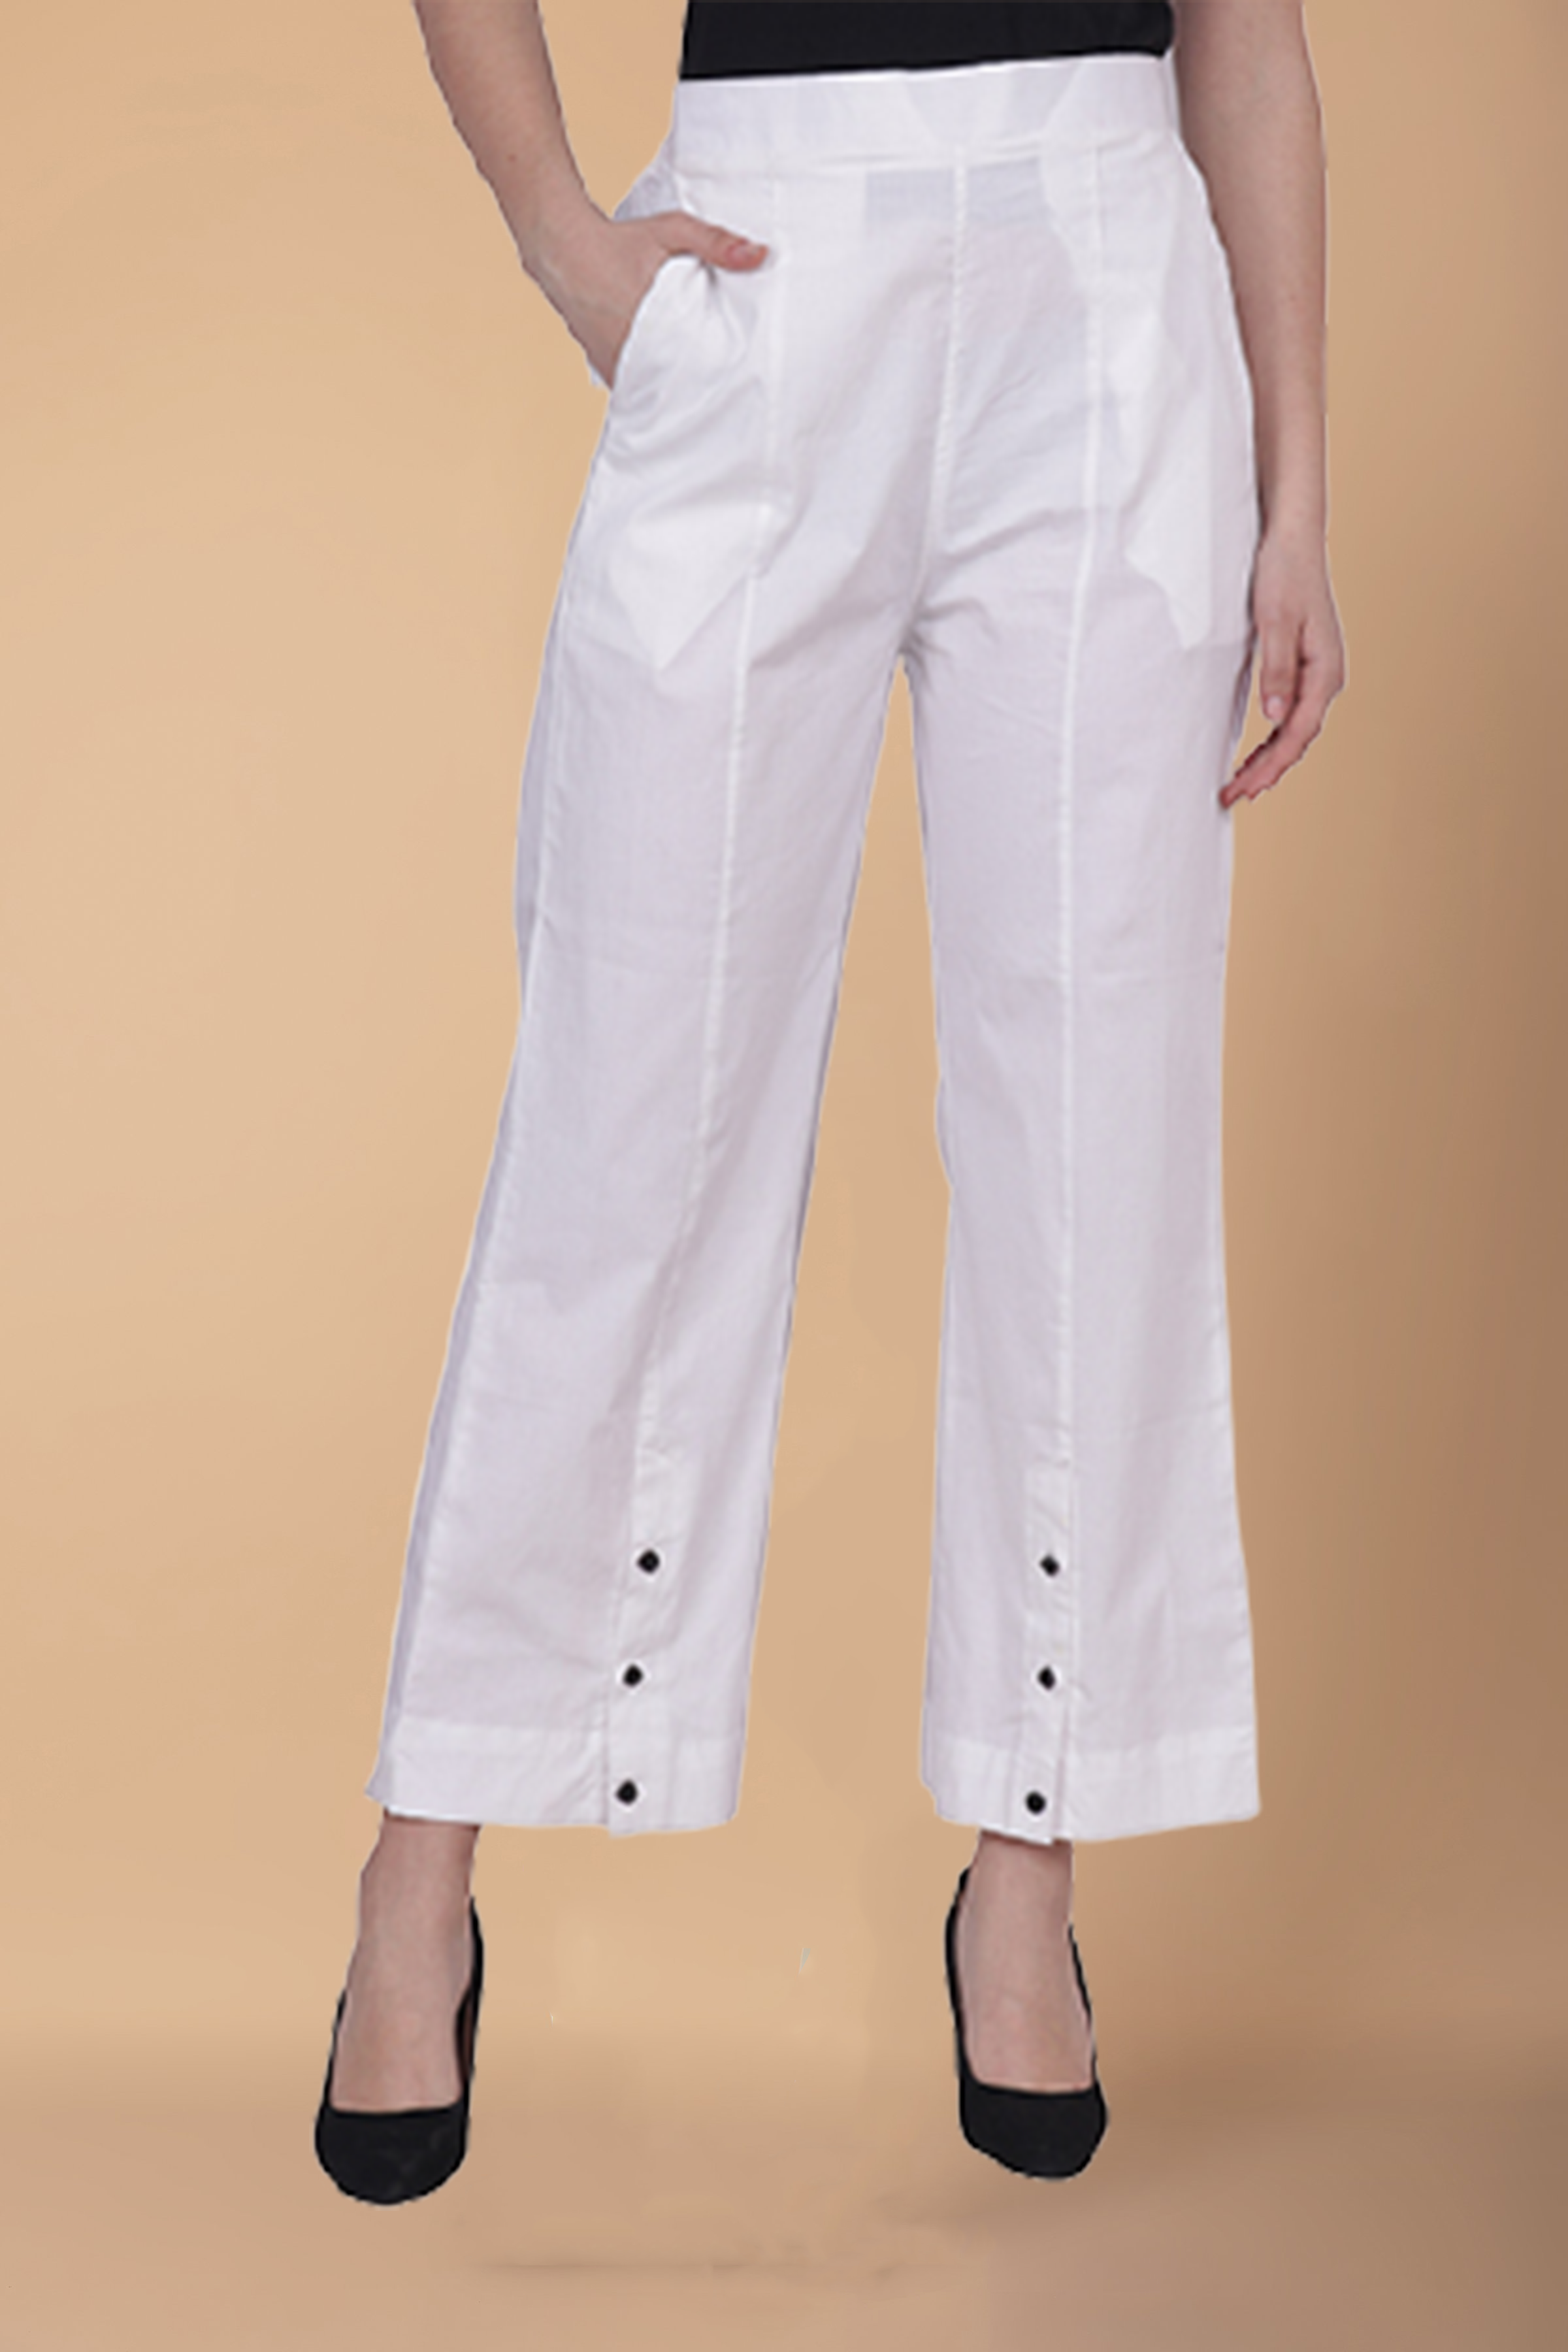 Buy BuyNewTrend White Black Lining Side Slits Striped Palazzo Pant For  Women Online at Low Prices in India  Paytmmallcom